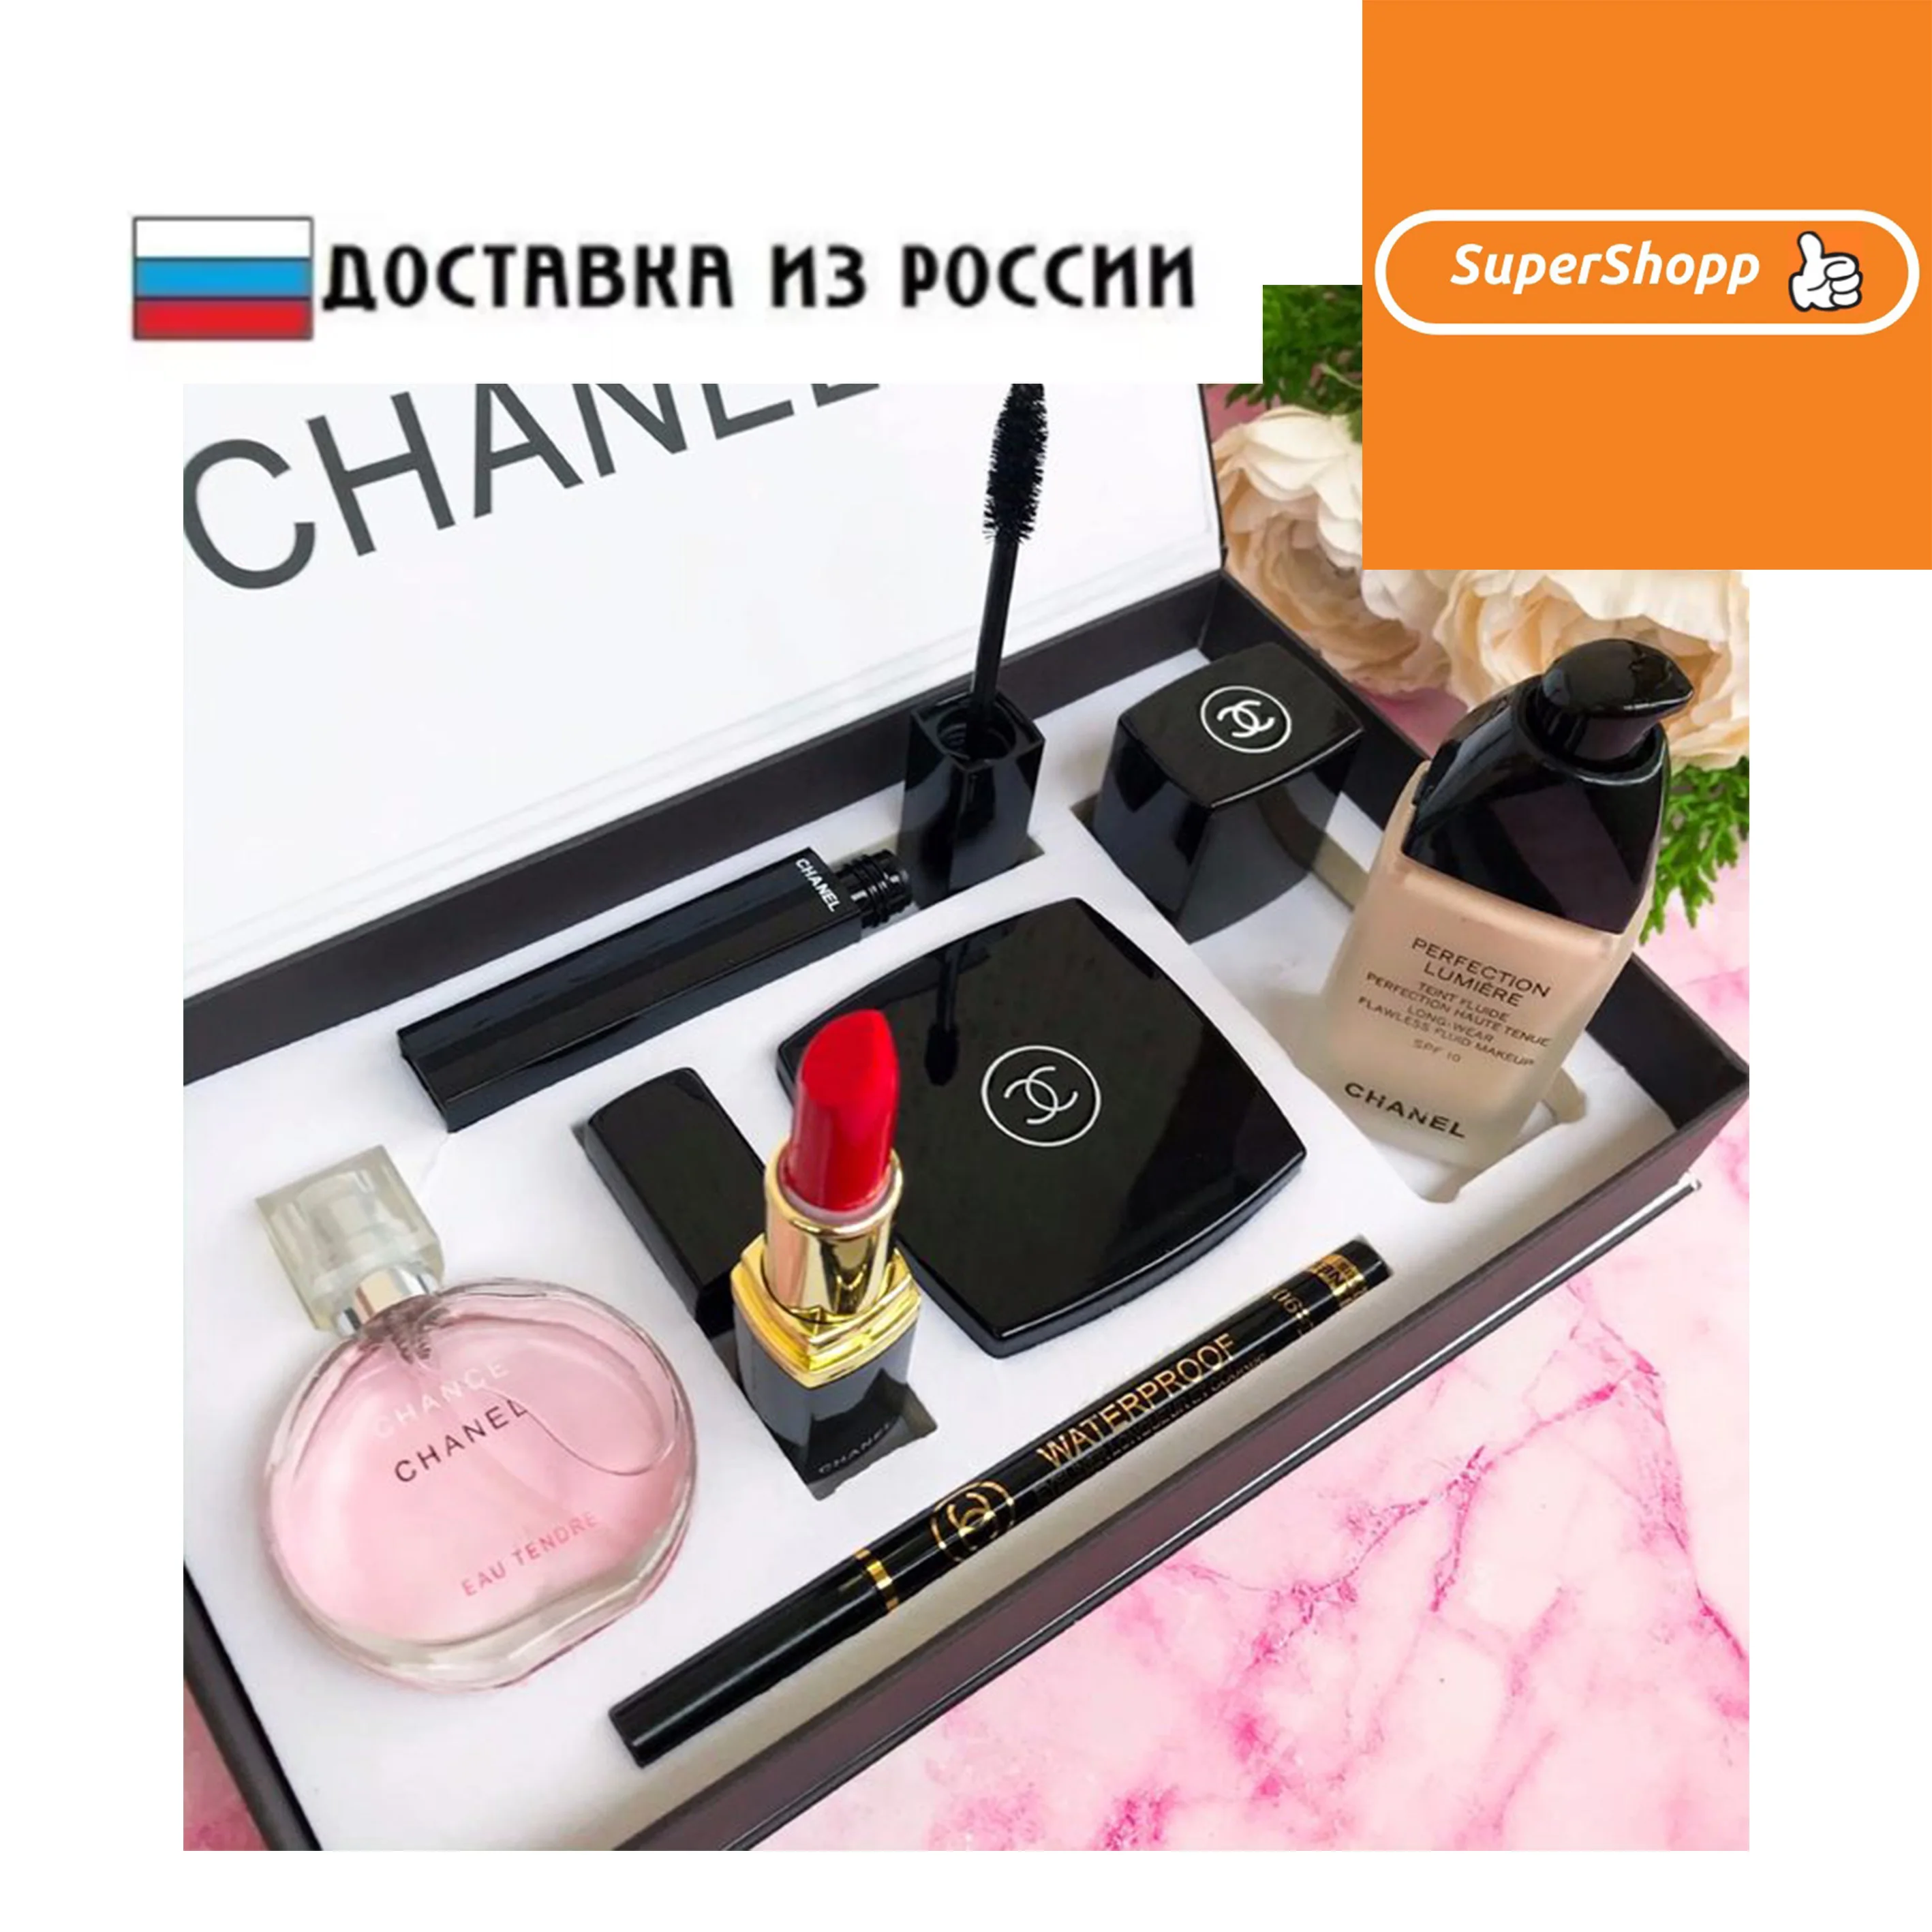 Gift Set of cosmetics Chanel 3 in 1 perfume chance tender, Coco  Mademoiselle 15 ml lipstick bright red set of 3 items